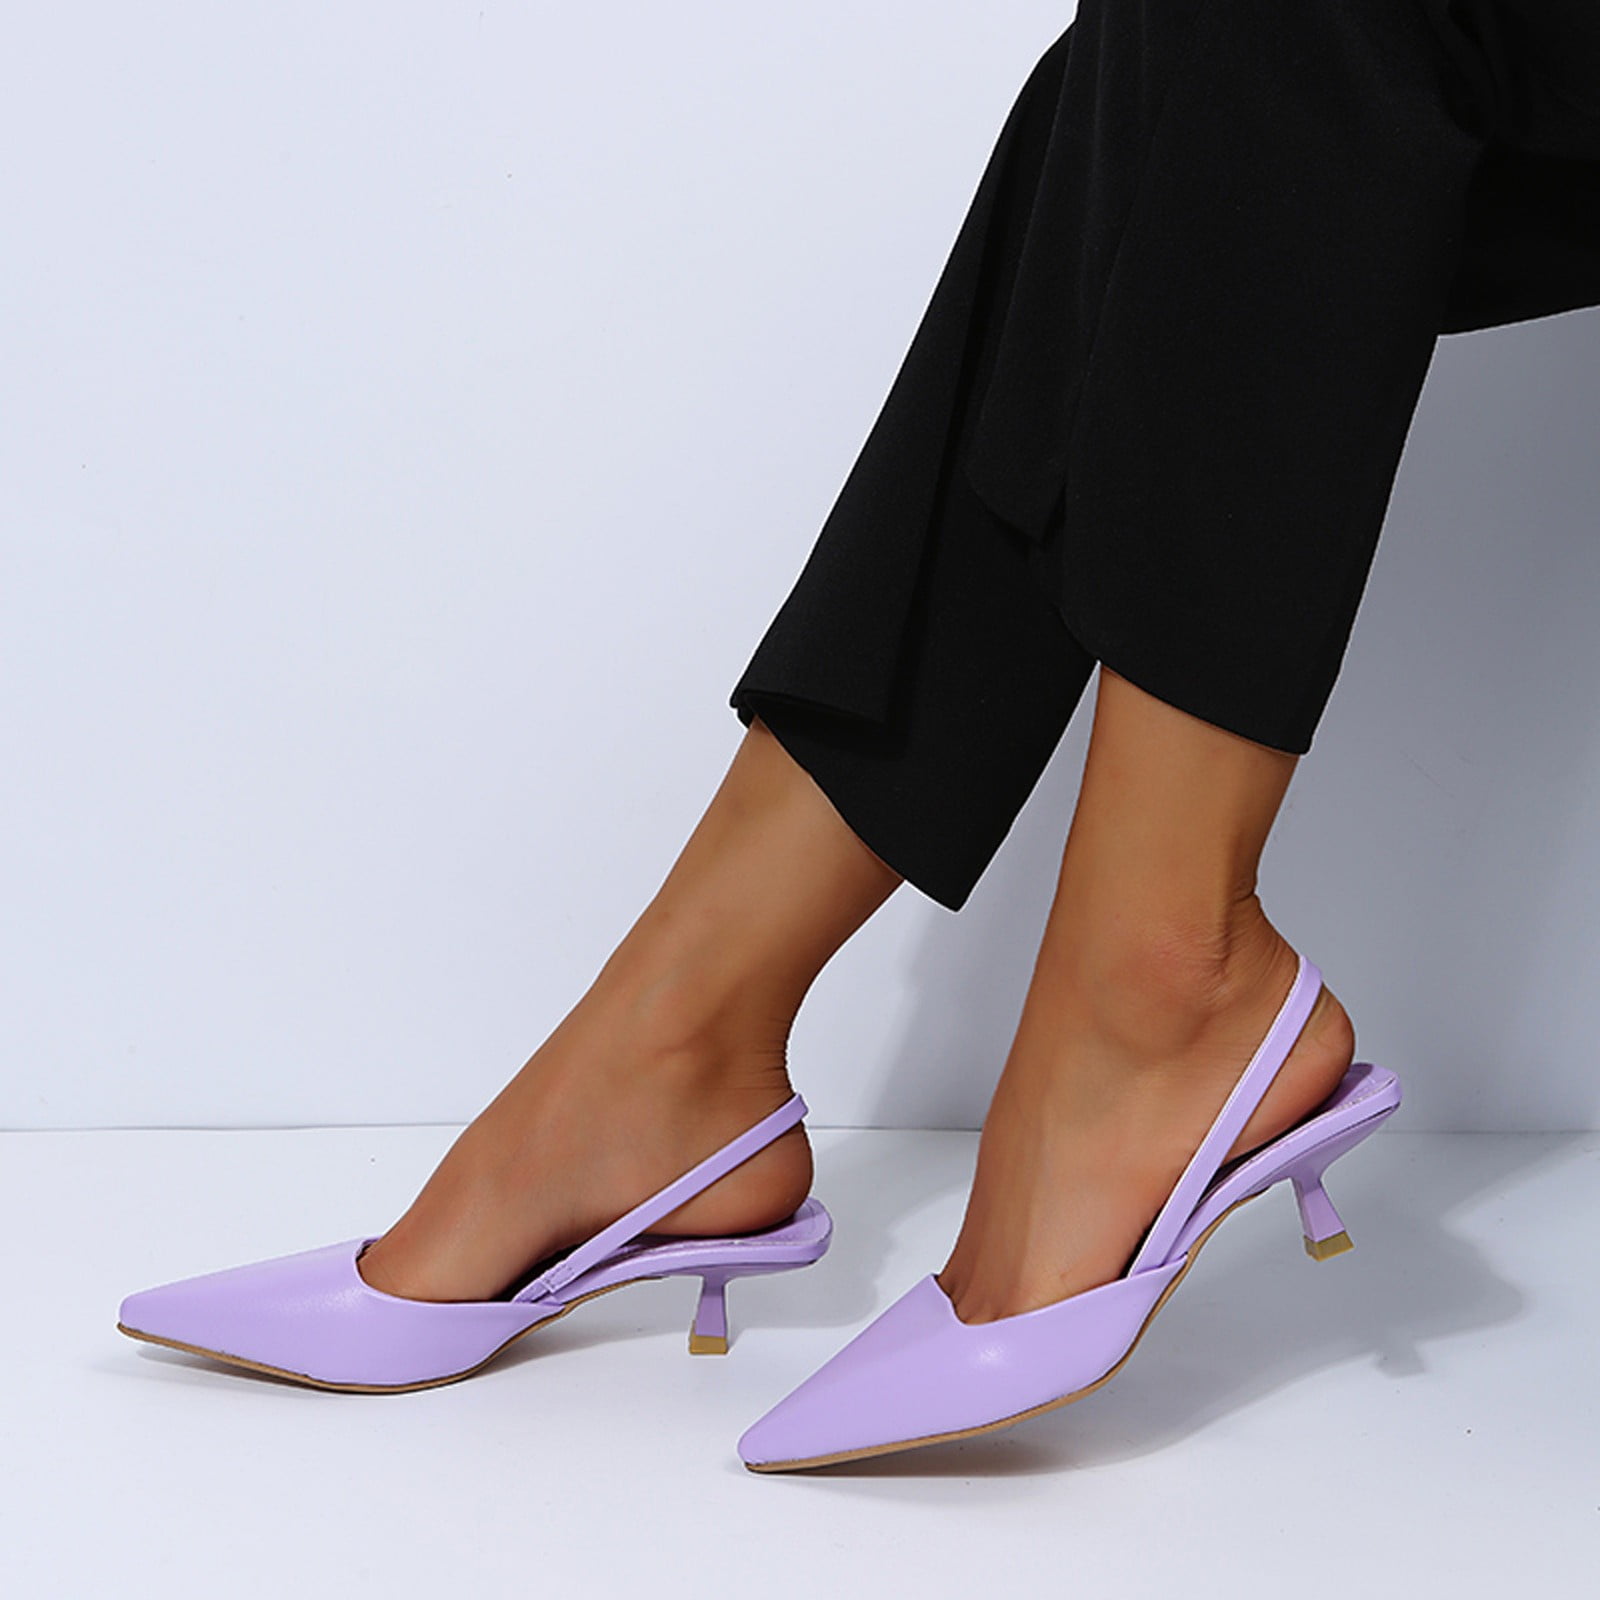 Cathalem Women High Heels Shoes Women Heels Casual Band Toe Elastic Shoes High Pointed Solid Color High Heel for Women Size 13 Purple 9 5 cdba87ff 8c10 4edf 8a71 25a5acea1f51.c4a7de5ebff74e7dd7b81c58fe4fa519